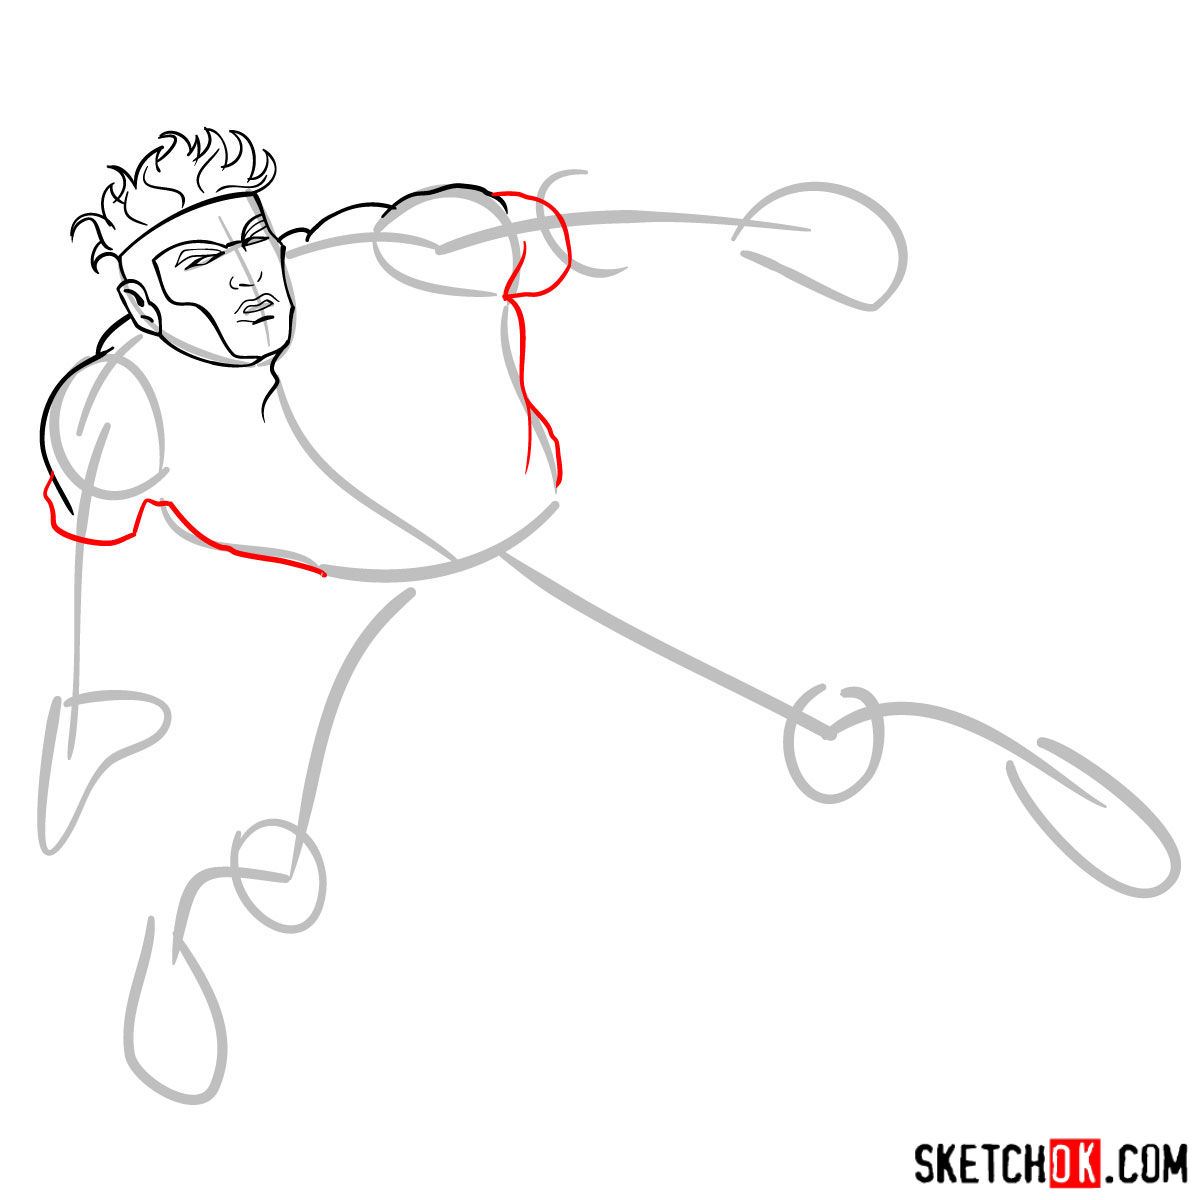 How to draw Havok from X-Men series - step by step tutorial -  step 06